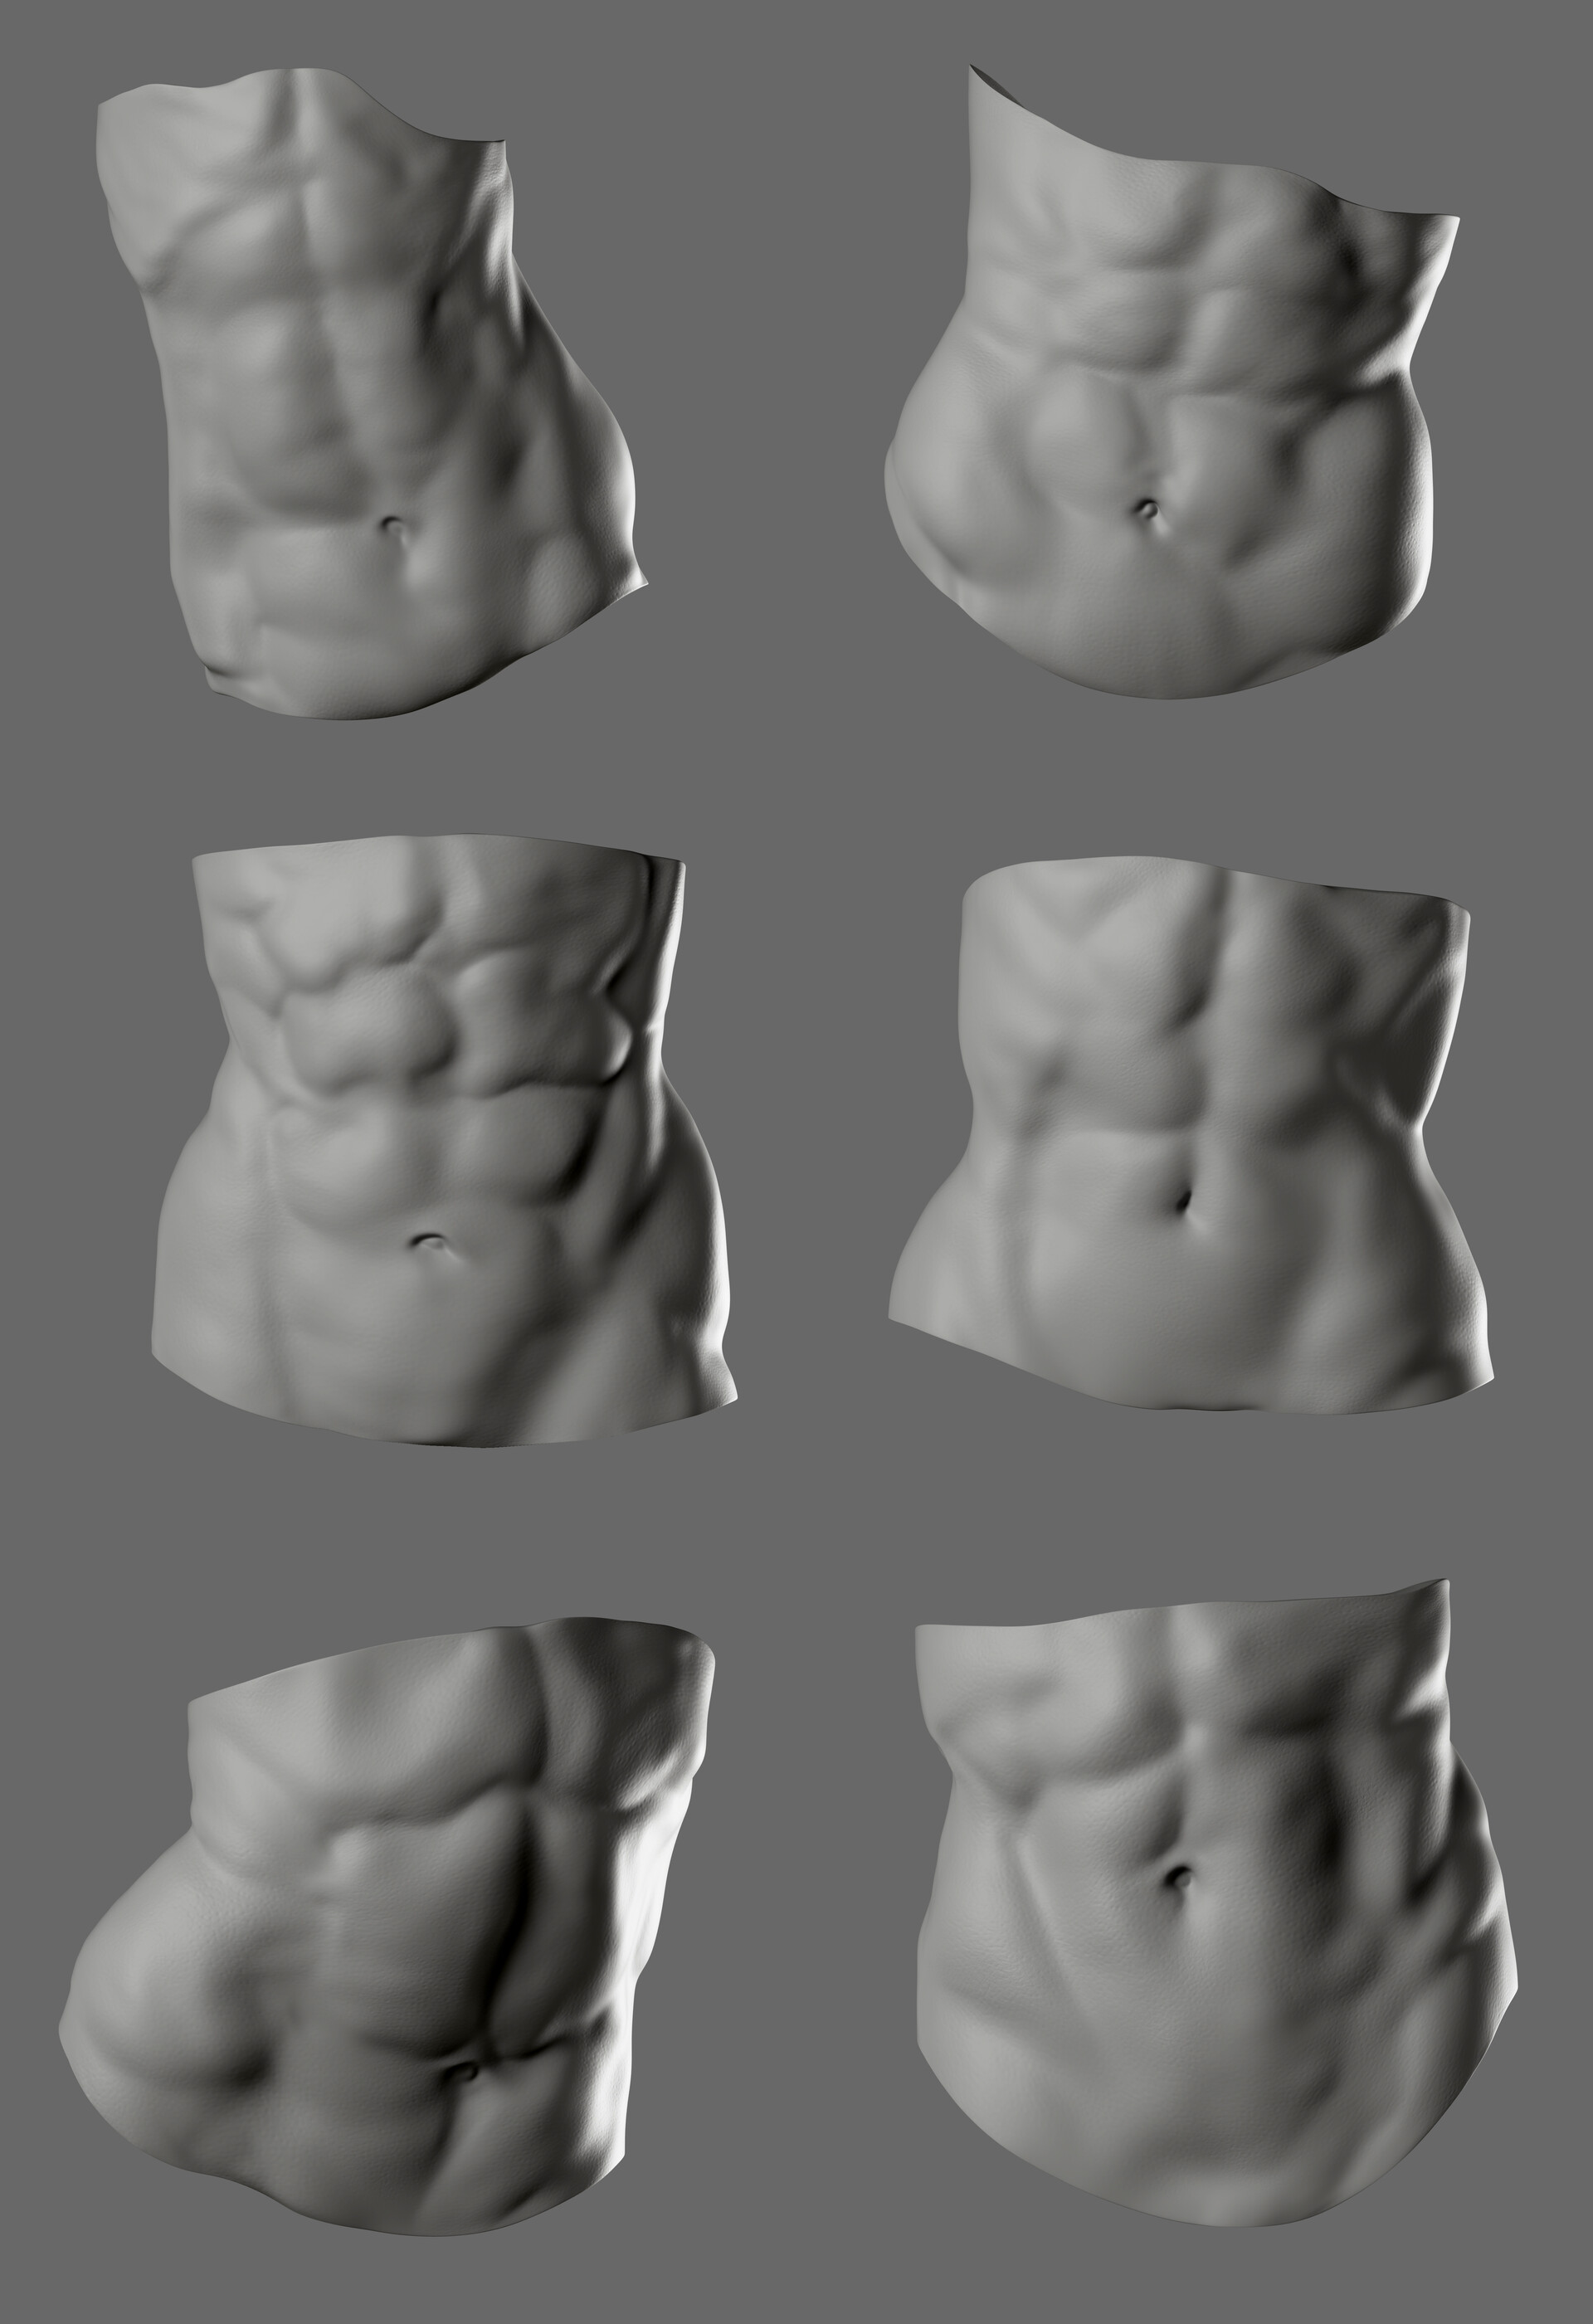 Laovaan on X I uploaded a new tutorial for drawing and painting abs on  youtube here is a sneak peek  the link for the video is in the thread   12